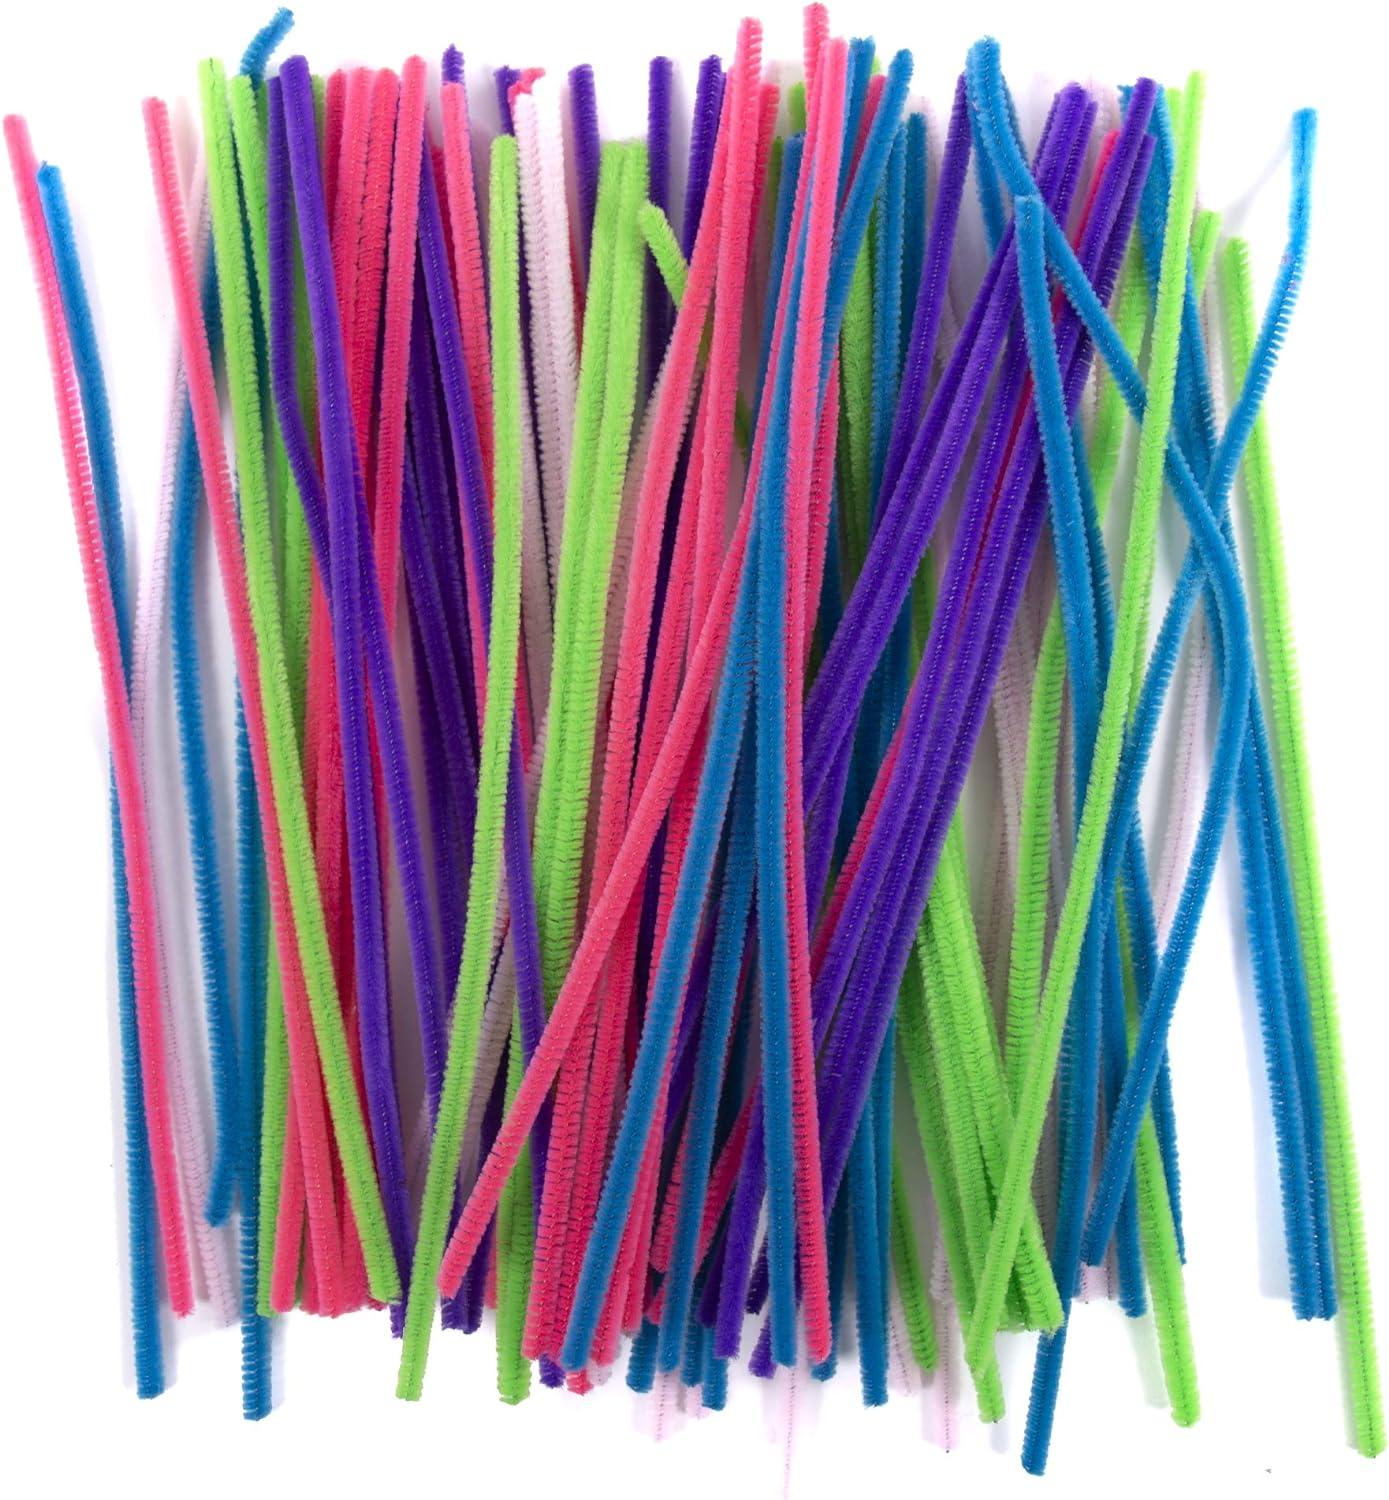 Rainbow Fuzzy Sticks Value Pack Of 100 Pipe Cleaners In Every